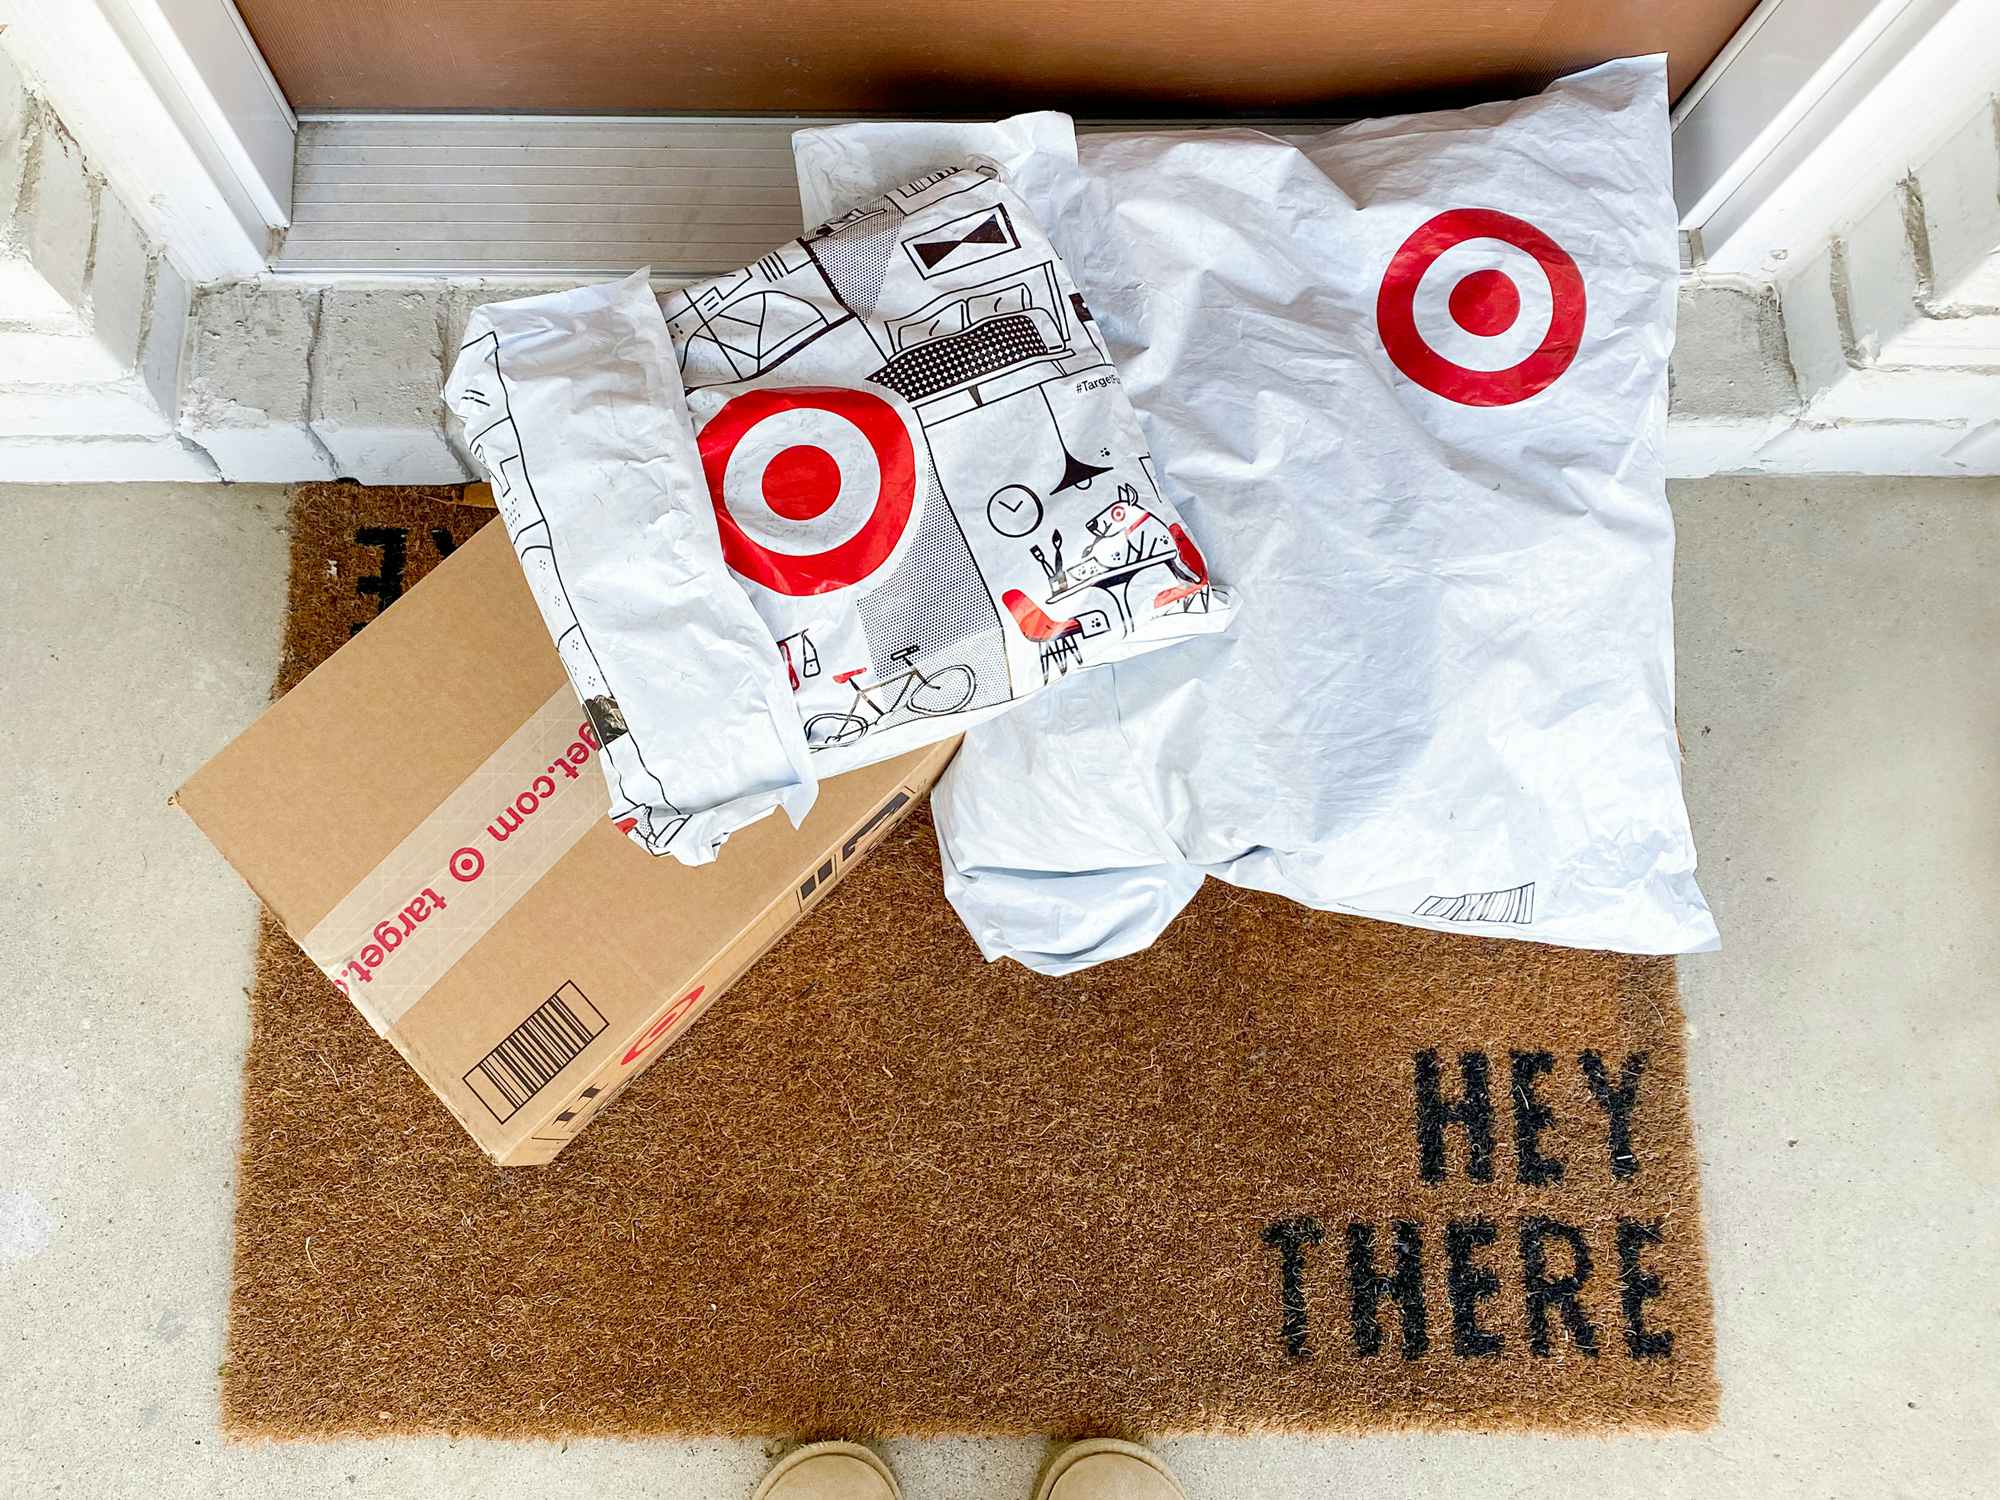 target boxes and packages outside of someone's front door